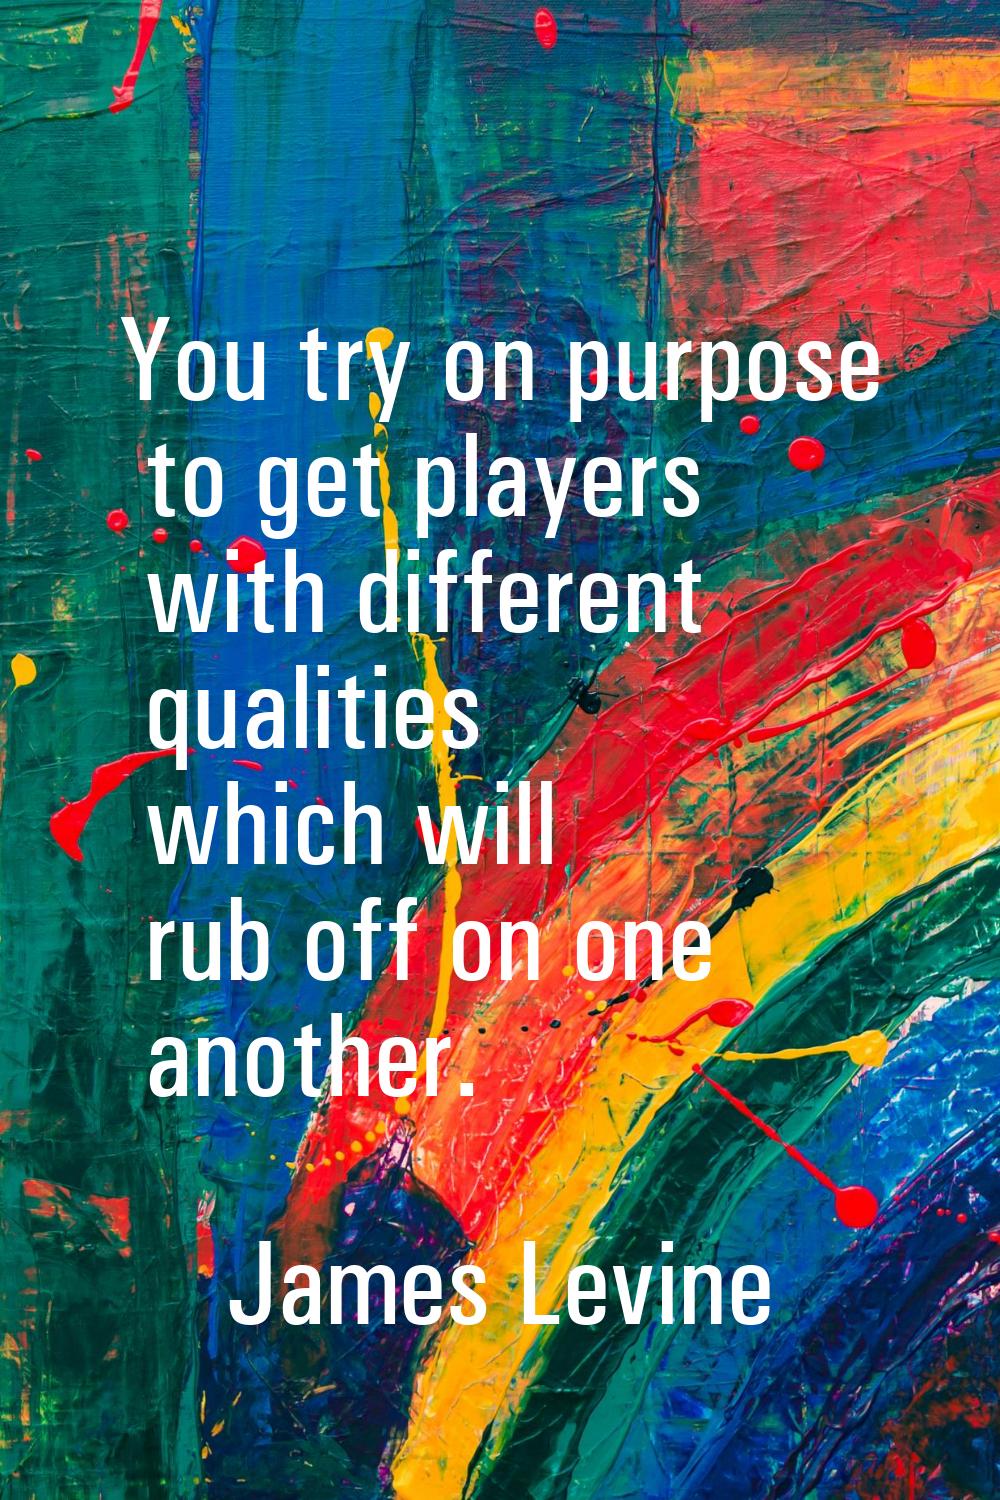 You try on purpose to get players with different qualities which will rub off on one another.